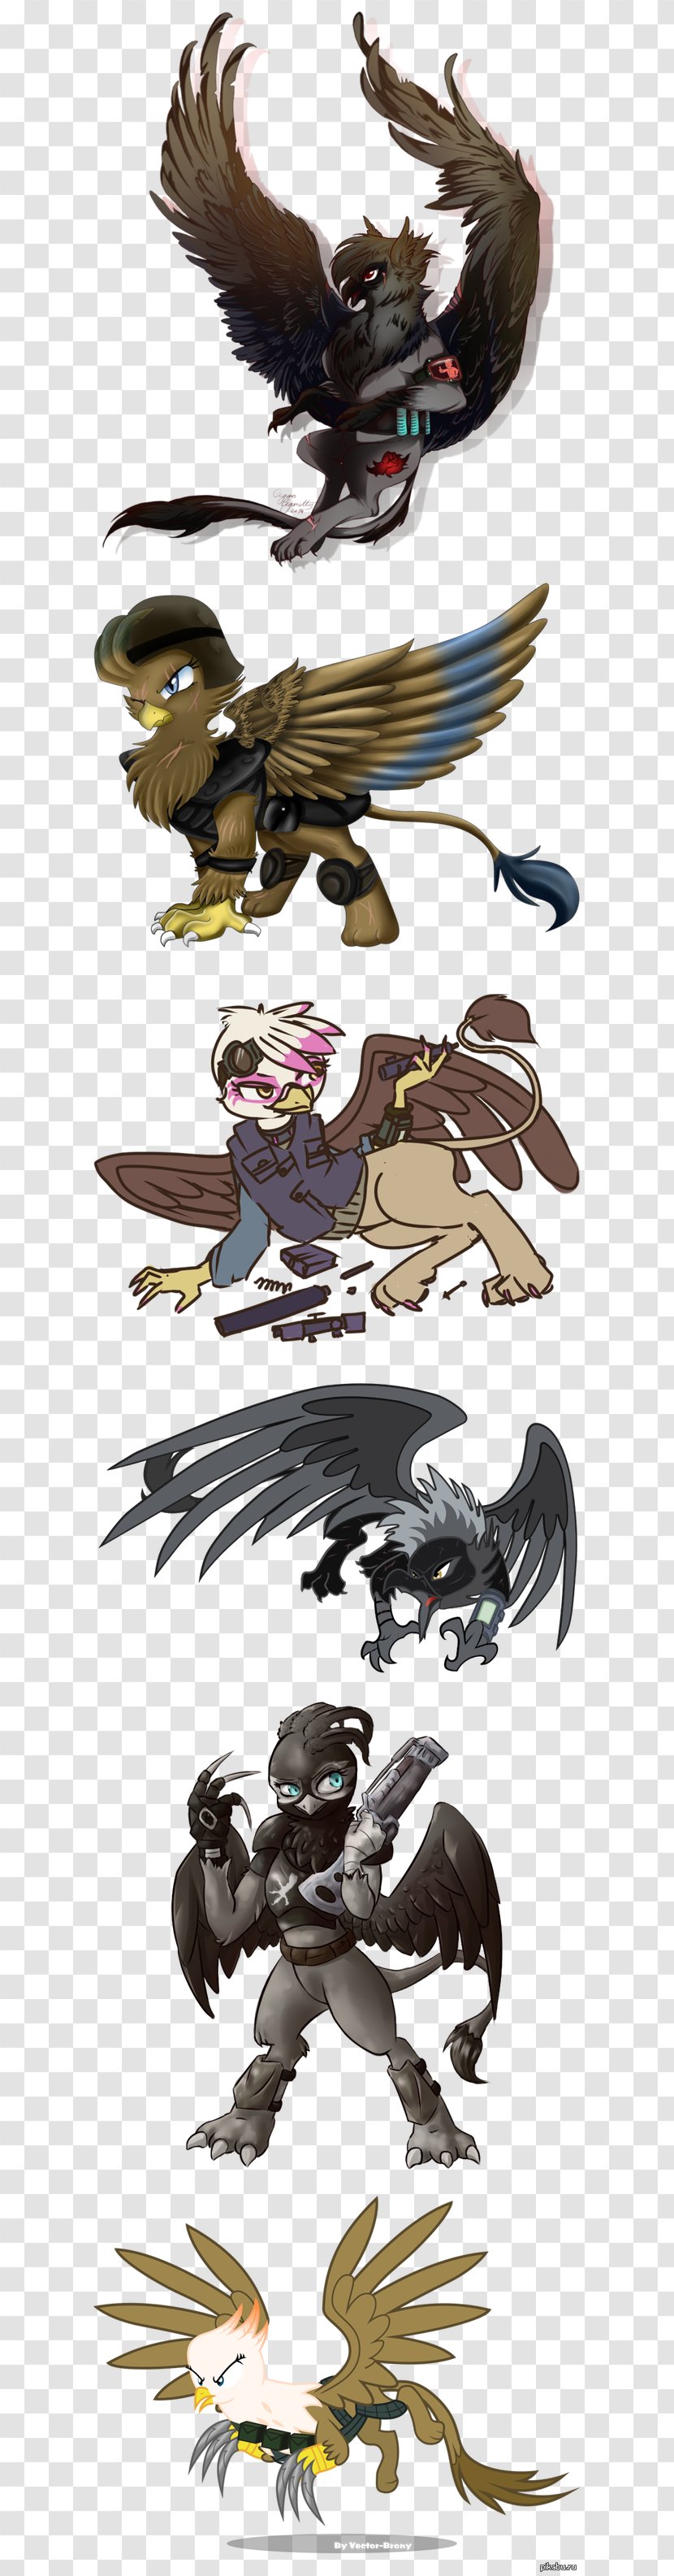 Fallout Equestria Griffin - Fictional Character Transparent PNG